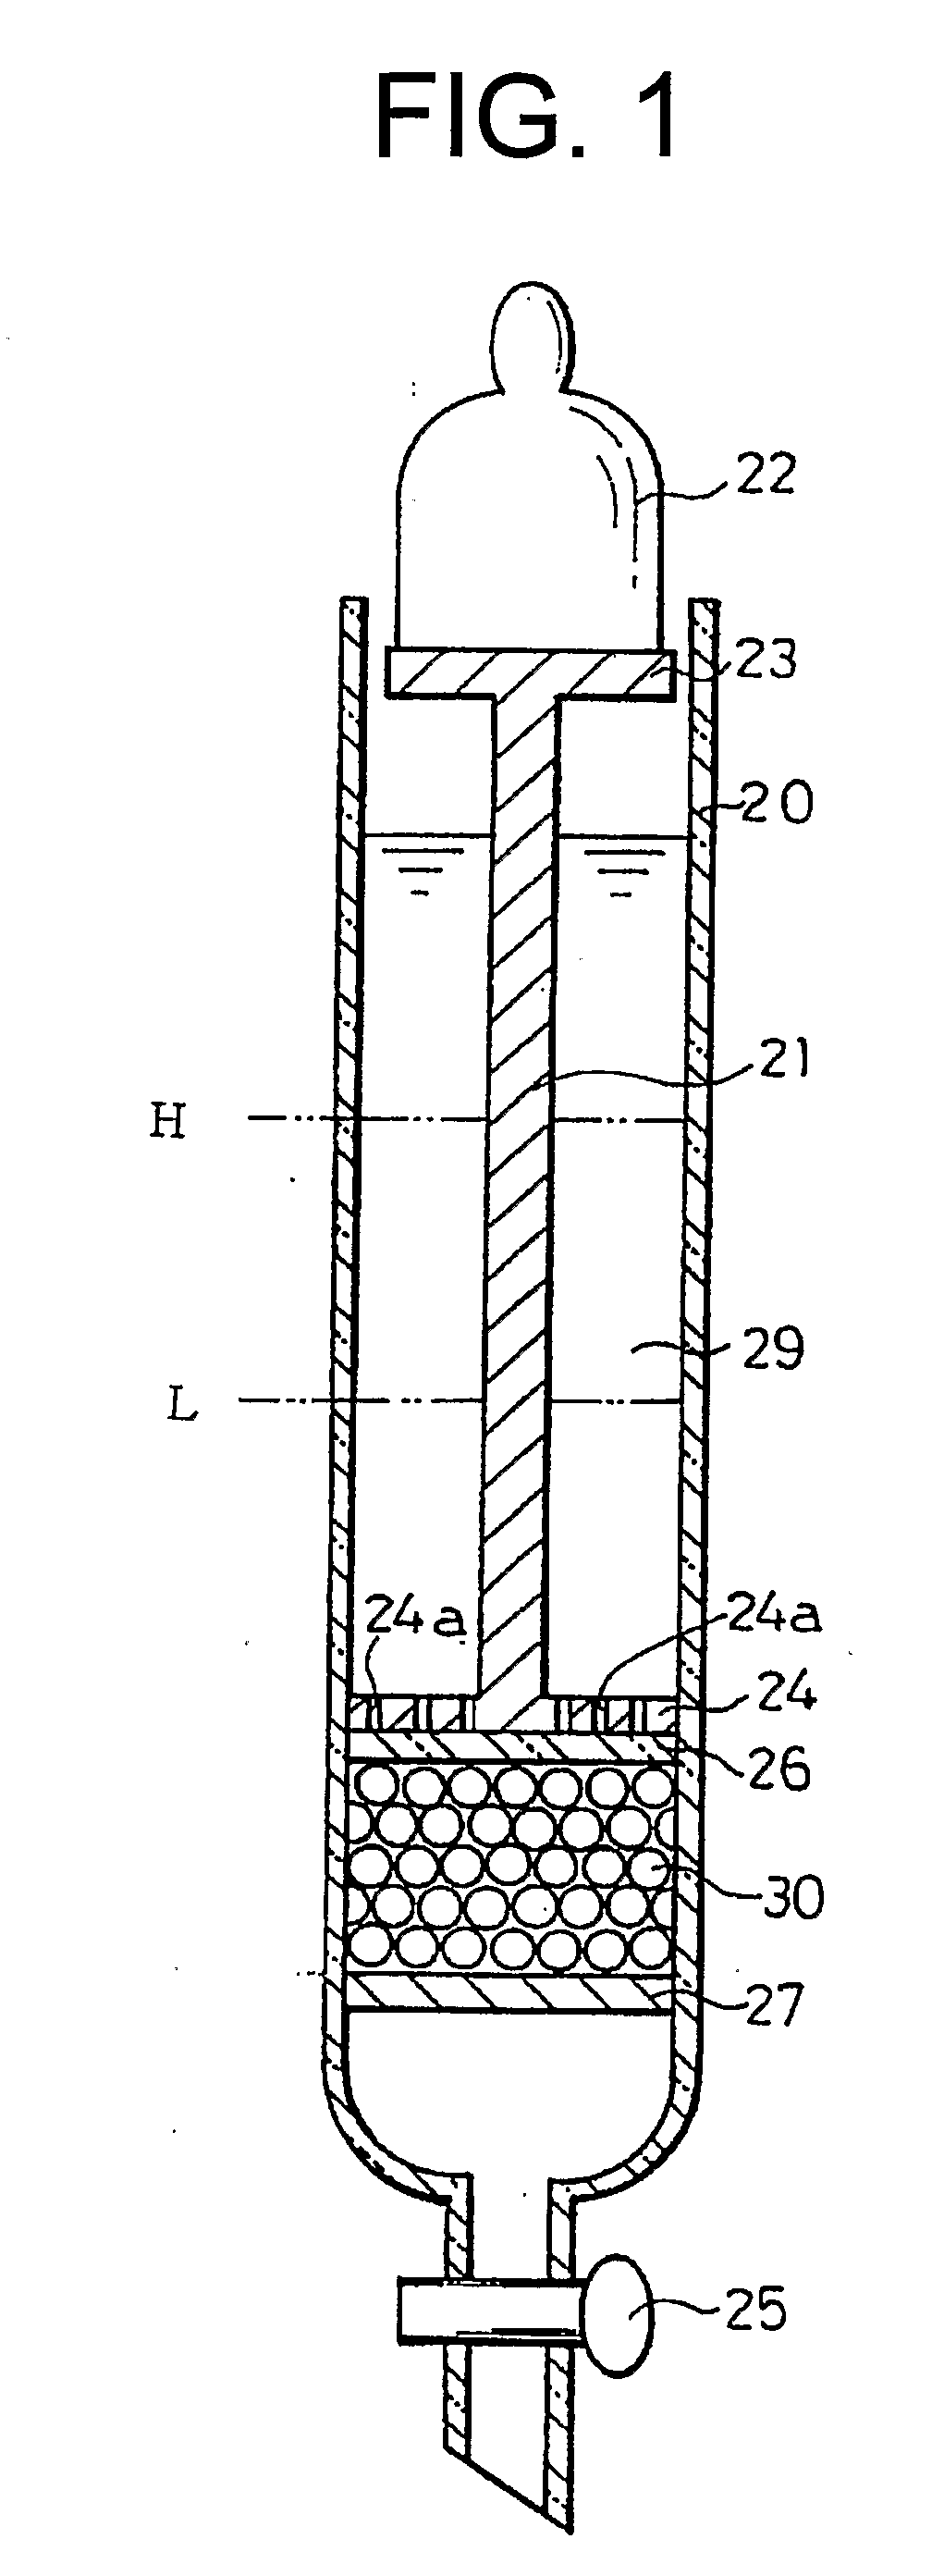 Particulate water absorbing agent with irregularly pulverized shape